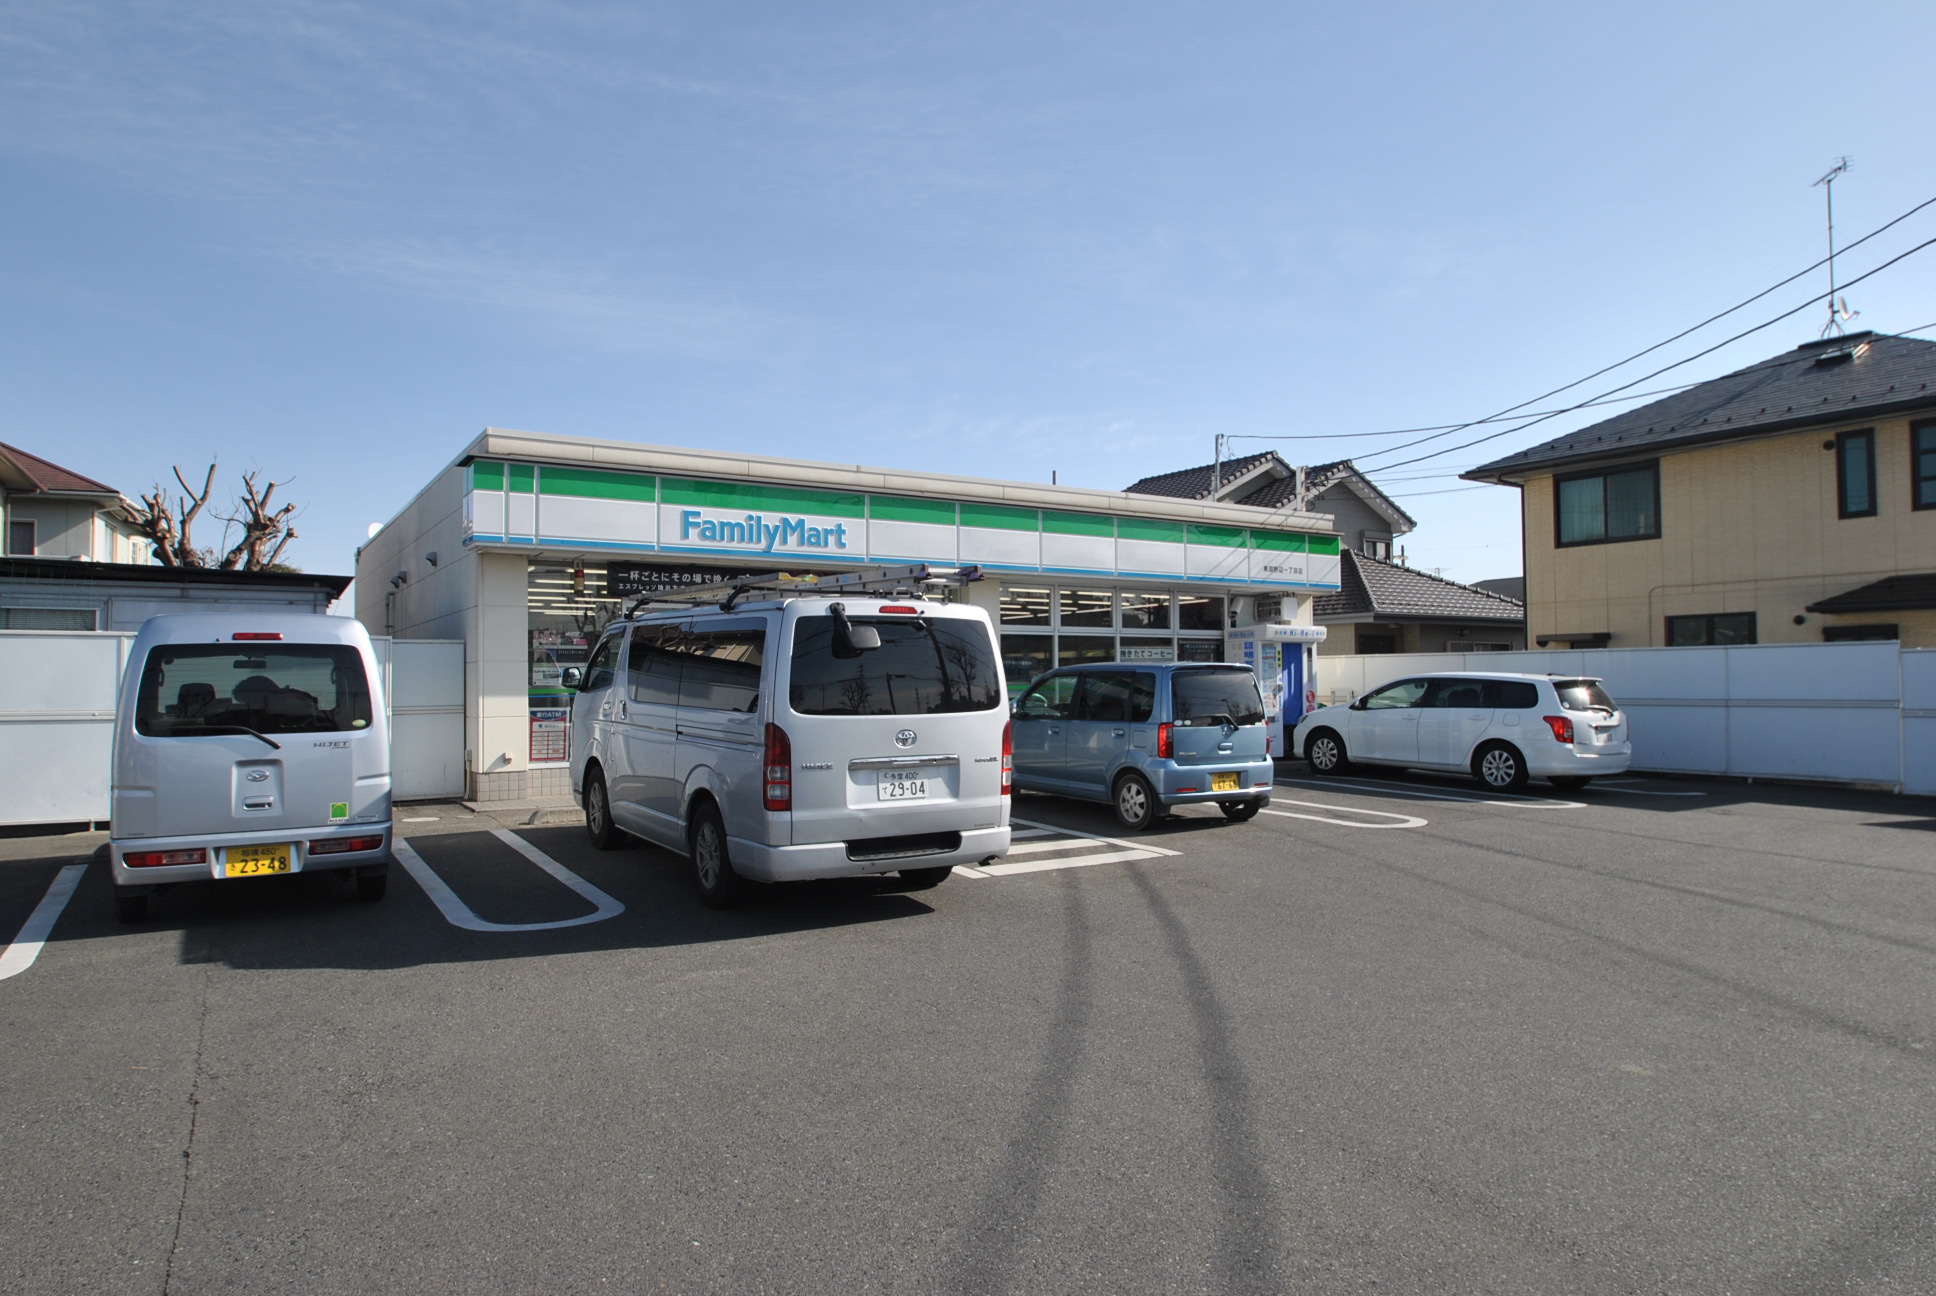 Convenience store. 179m to Family Mart (convenience store)